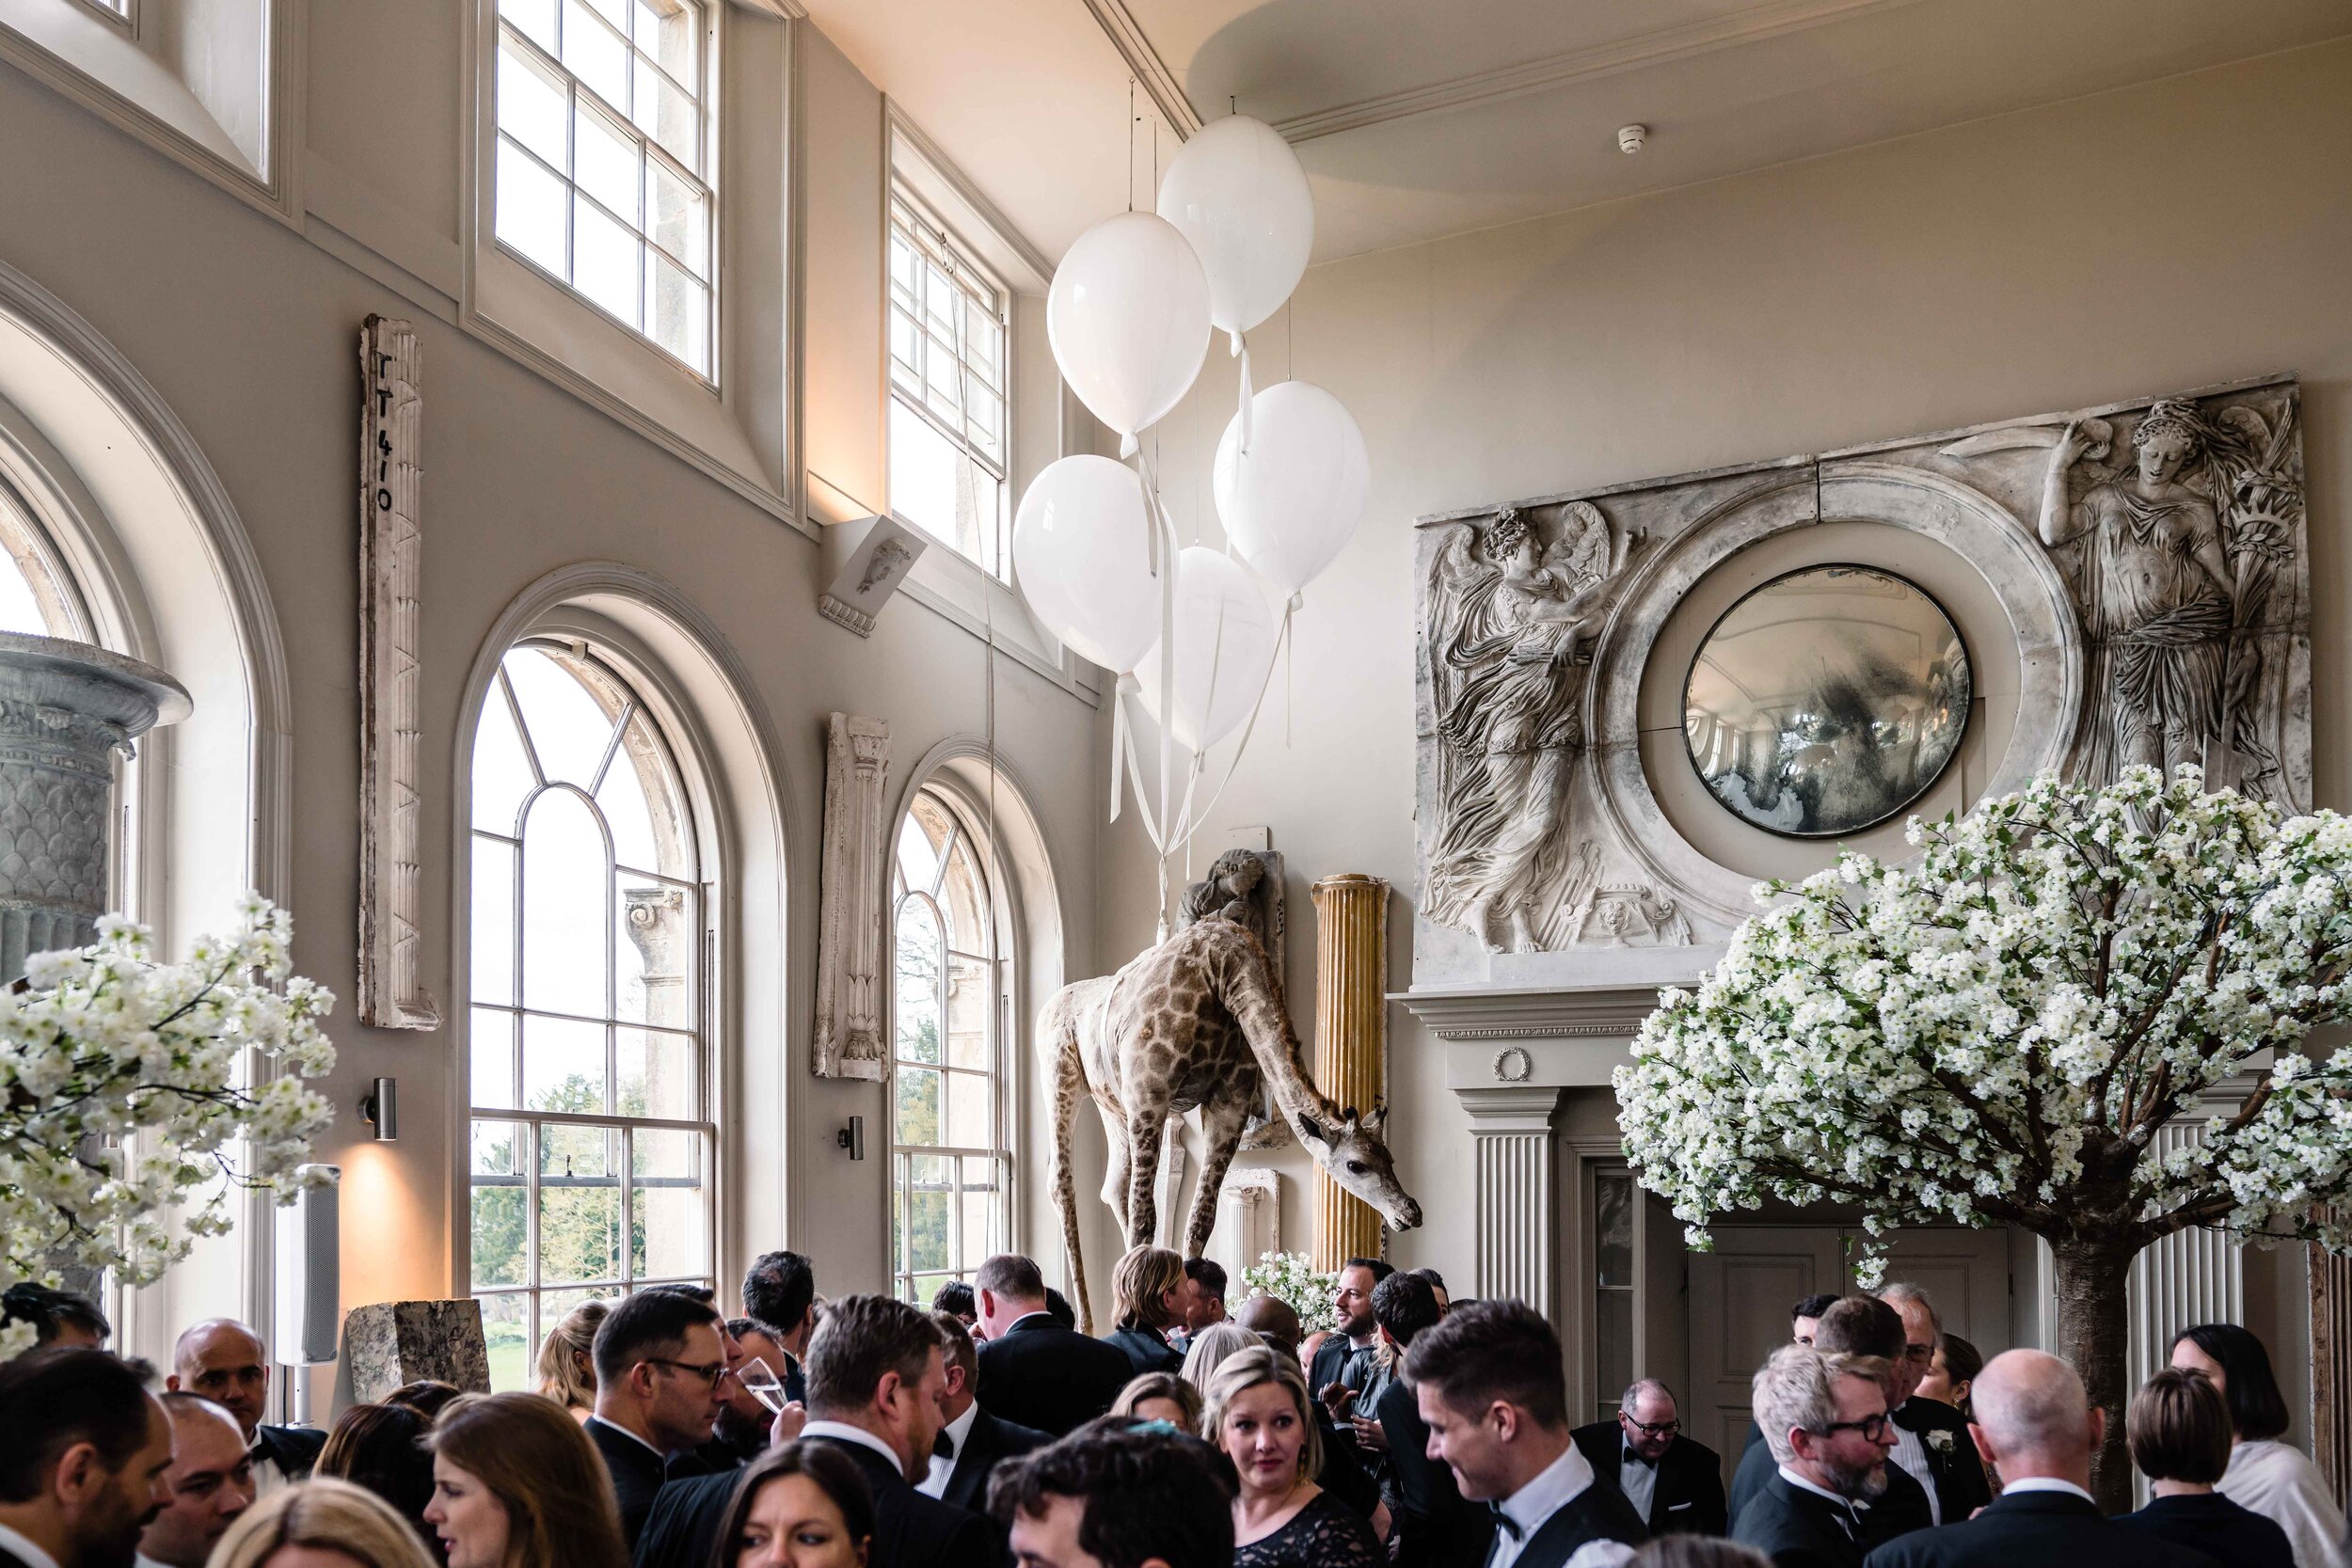 light filled orangery with a crowd of wedding guests with balloon decorations